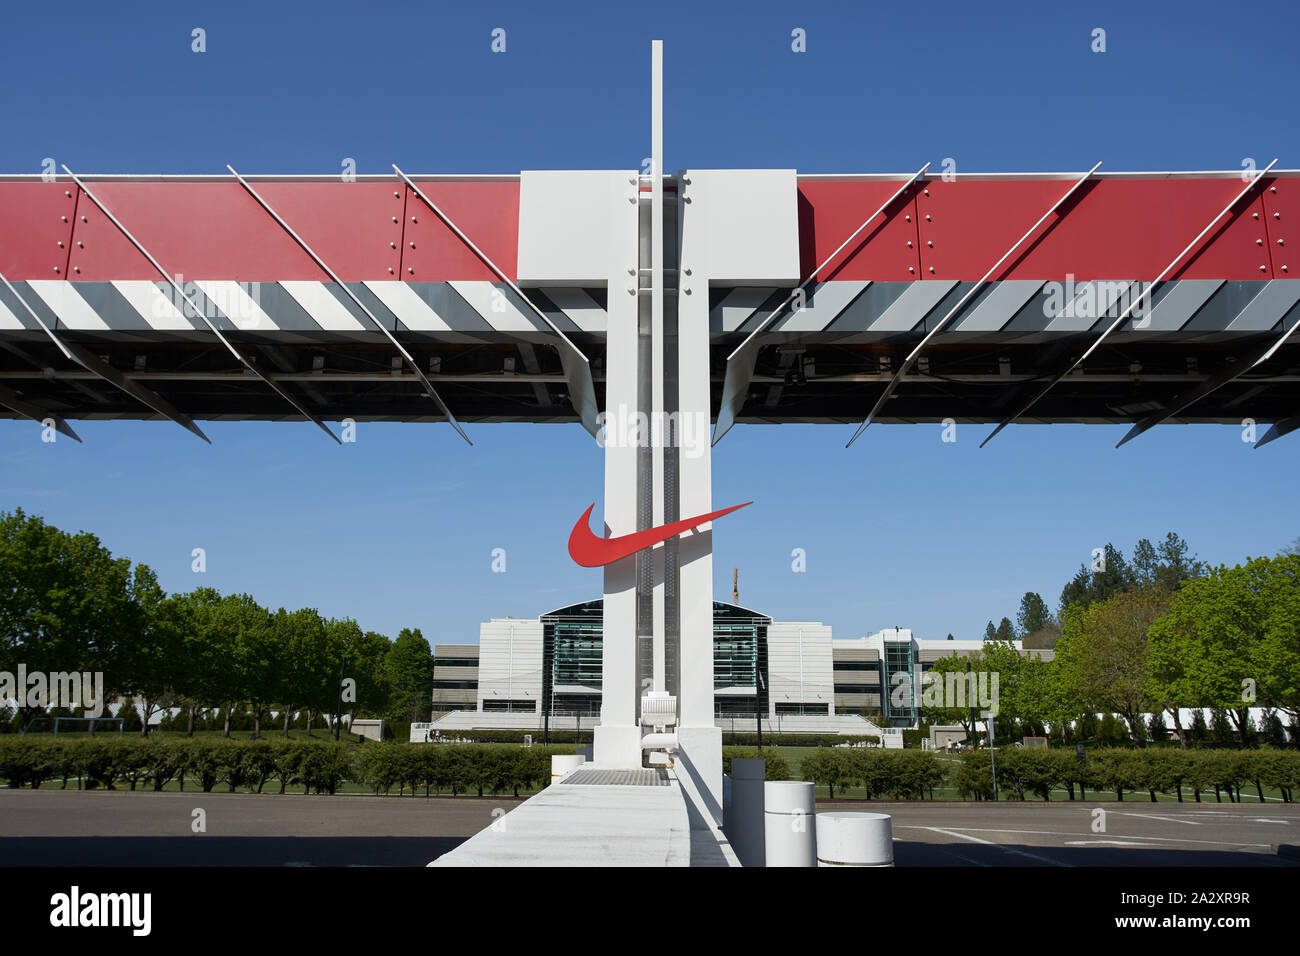 The Nike "Swoosh" logo is seen at one of the entrances to Nike World  Headquarters in Beaverton, Oregon, United States Stock Photo - Alamy